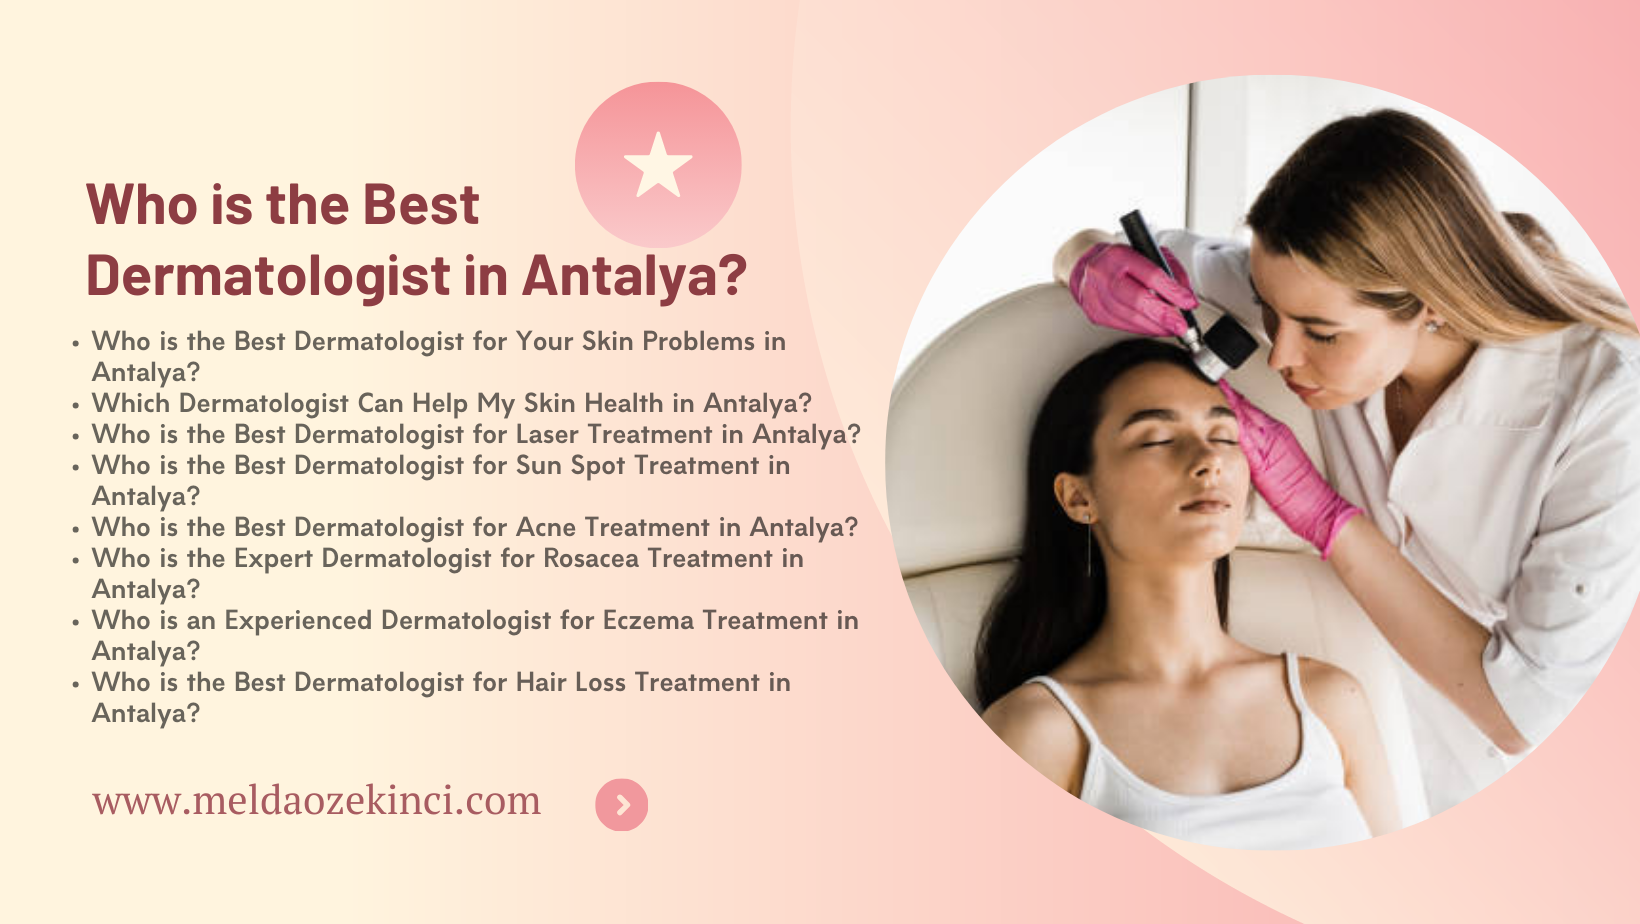 Who is the Best Dermatologist in Antalya?